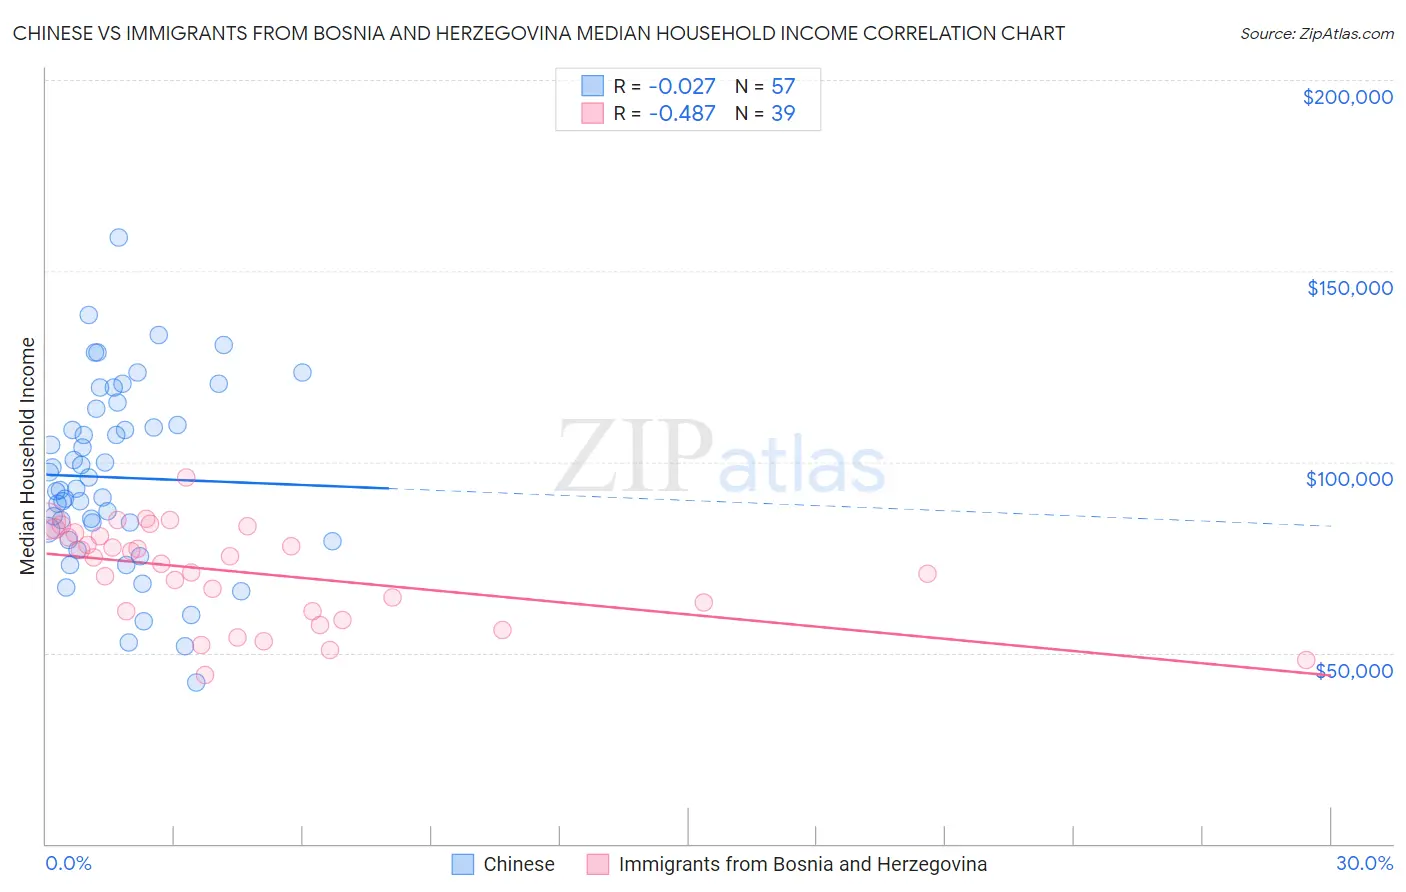 Chinese vs Immigrants from Bosnia and Herzegovina Median Household Income